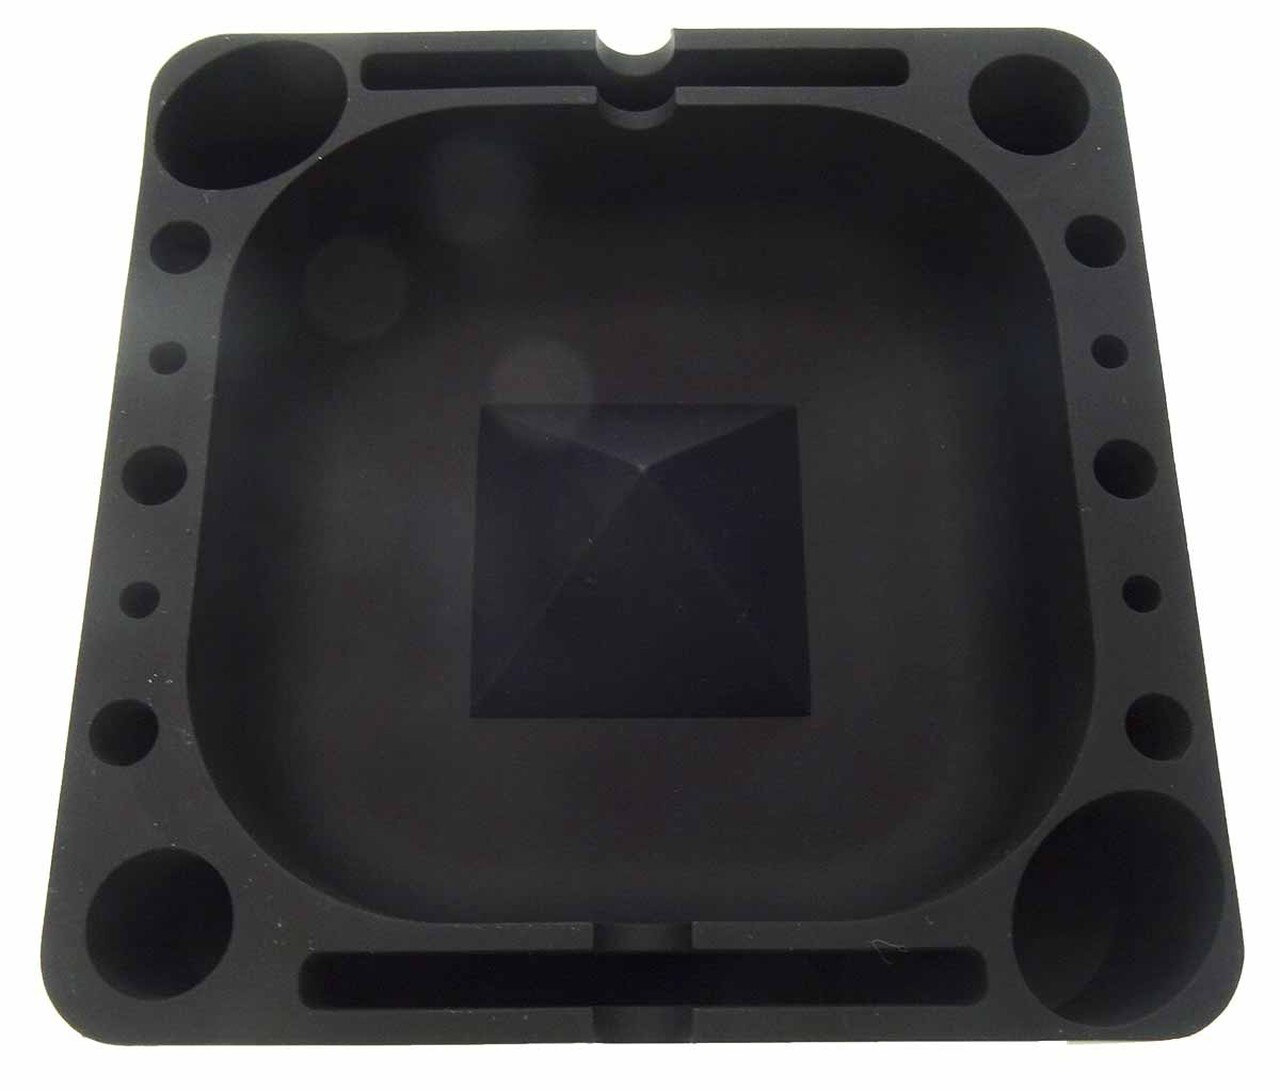 Pulsar silicone tap tray ash tray.  Holds all of your tools!